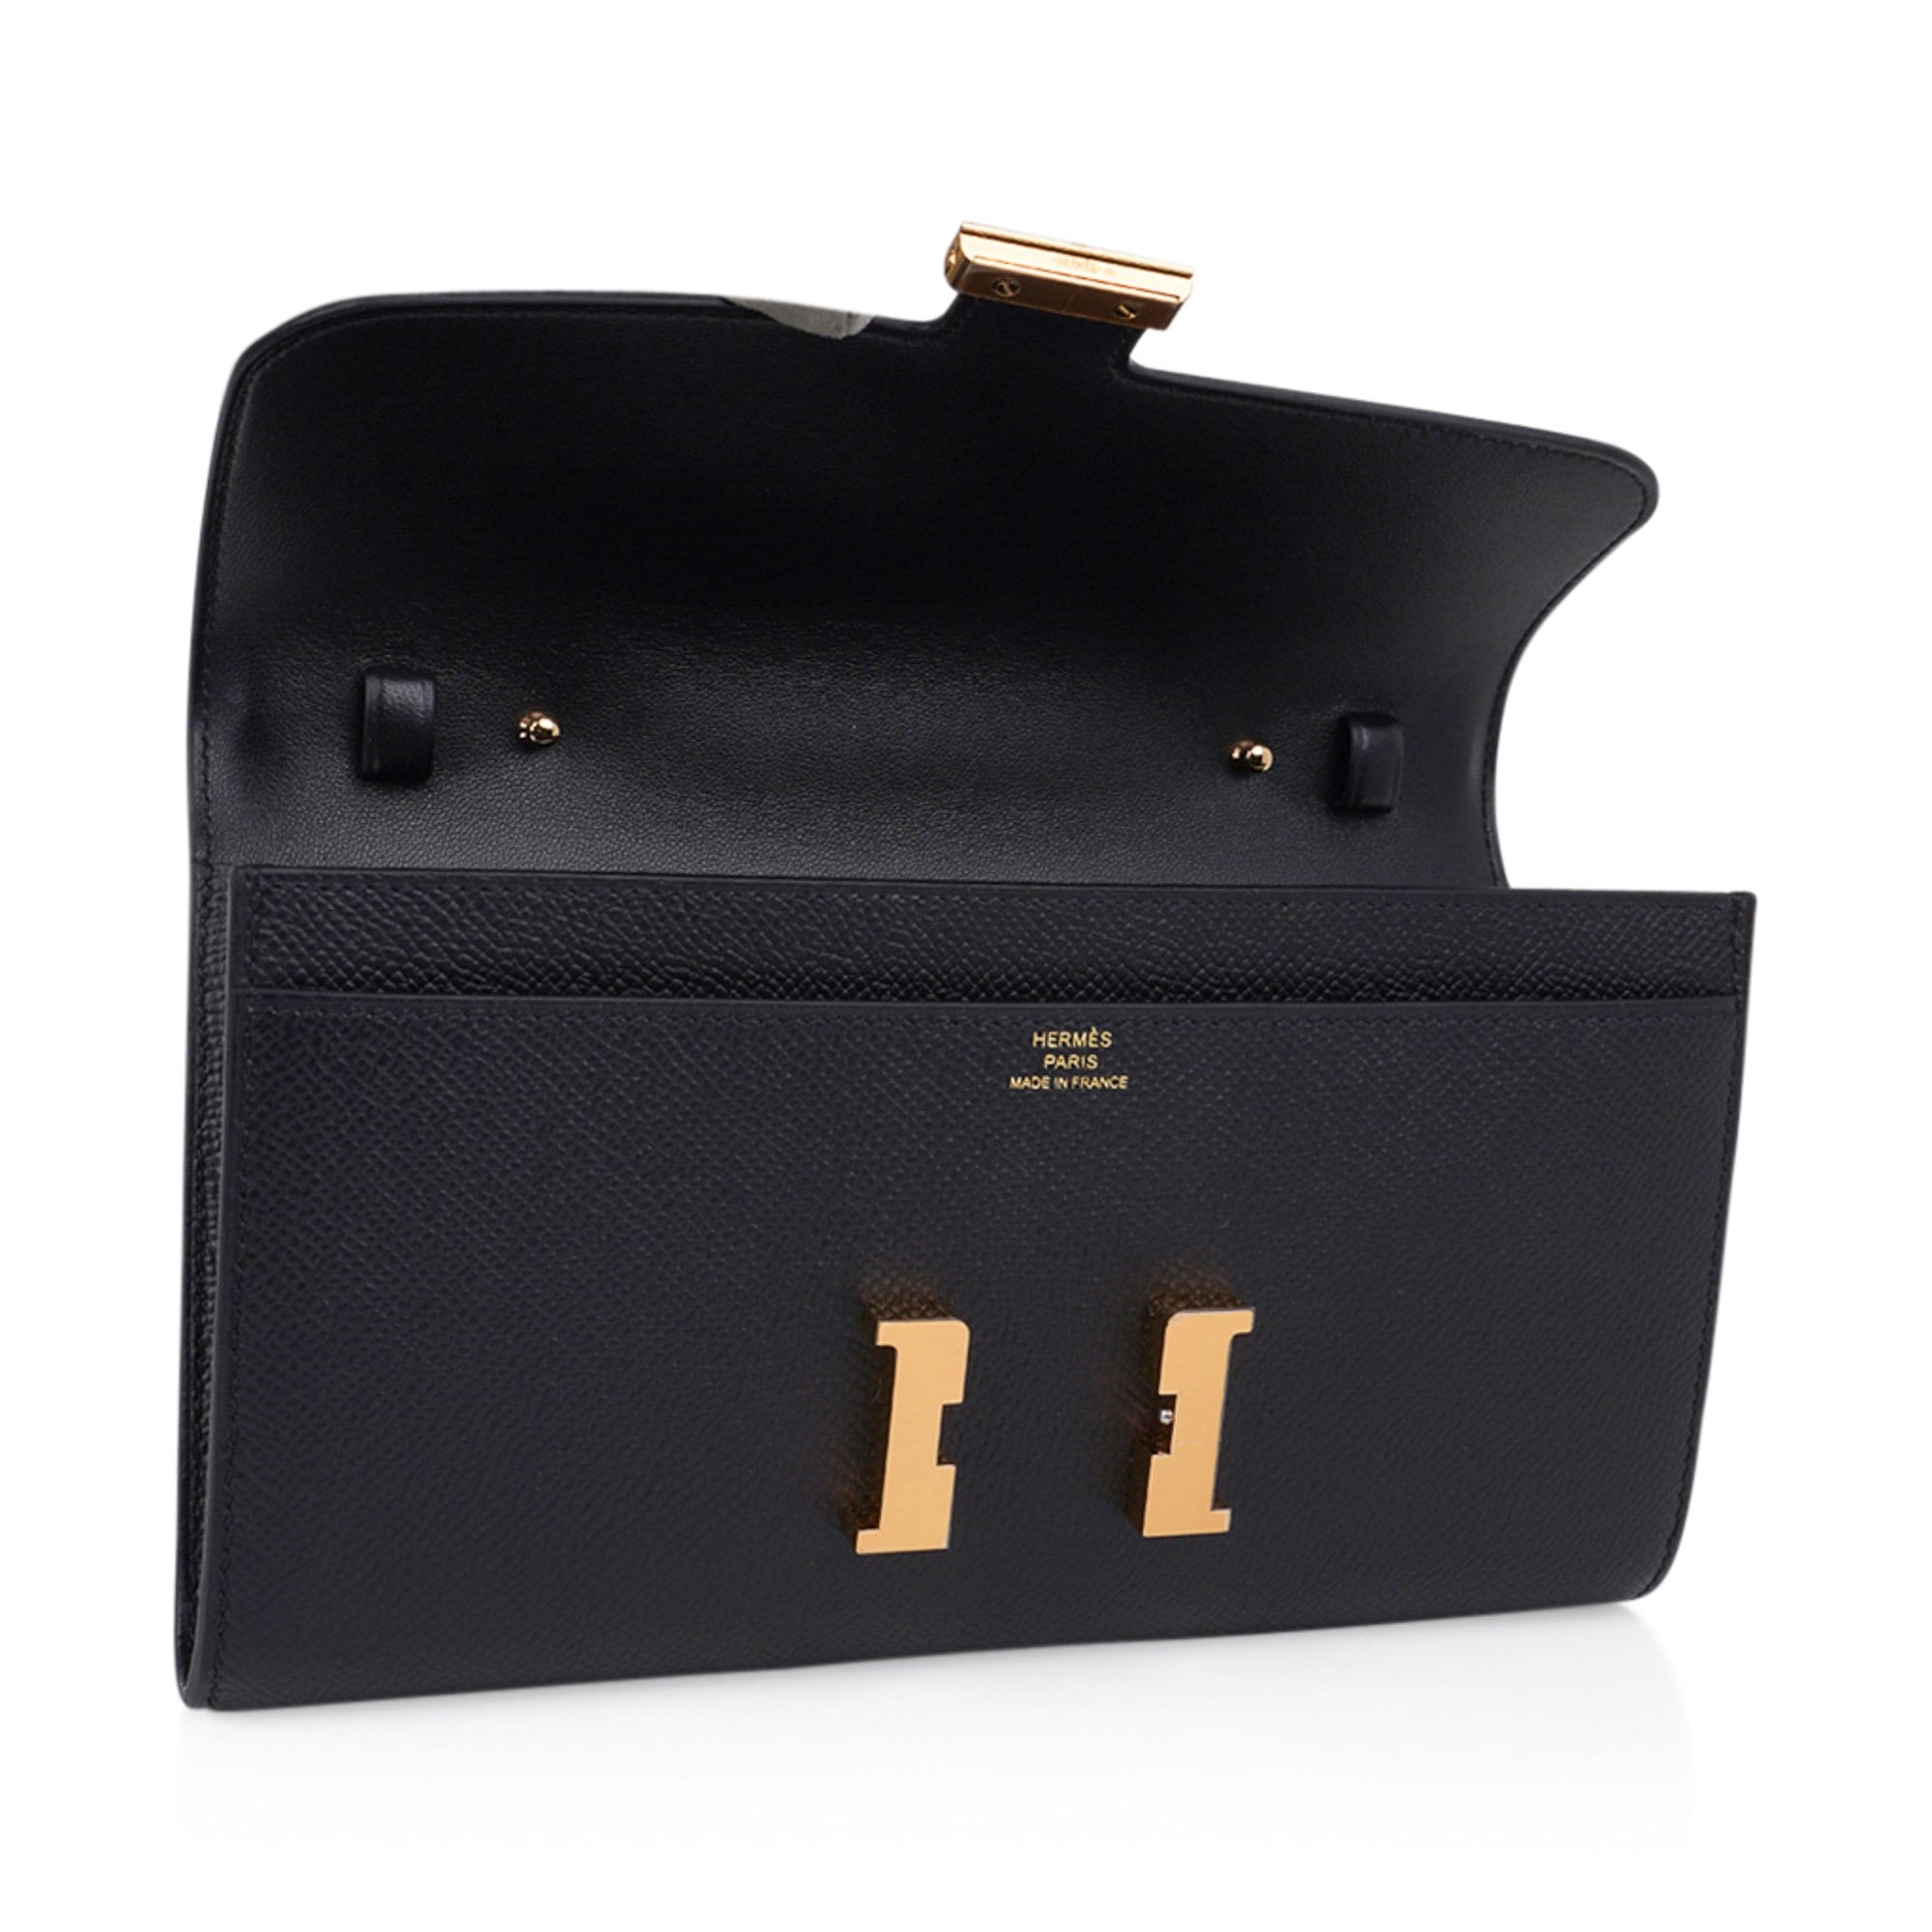 Hermès Nata Epsom Constance To-Go Gold Hardware, 2022 Available